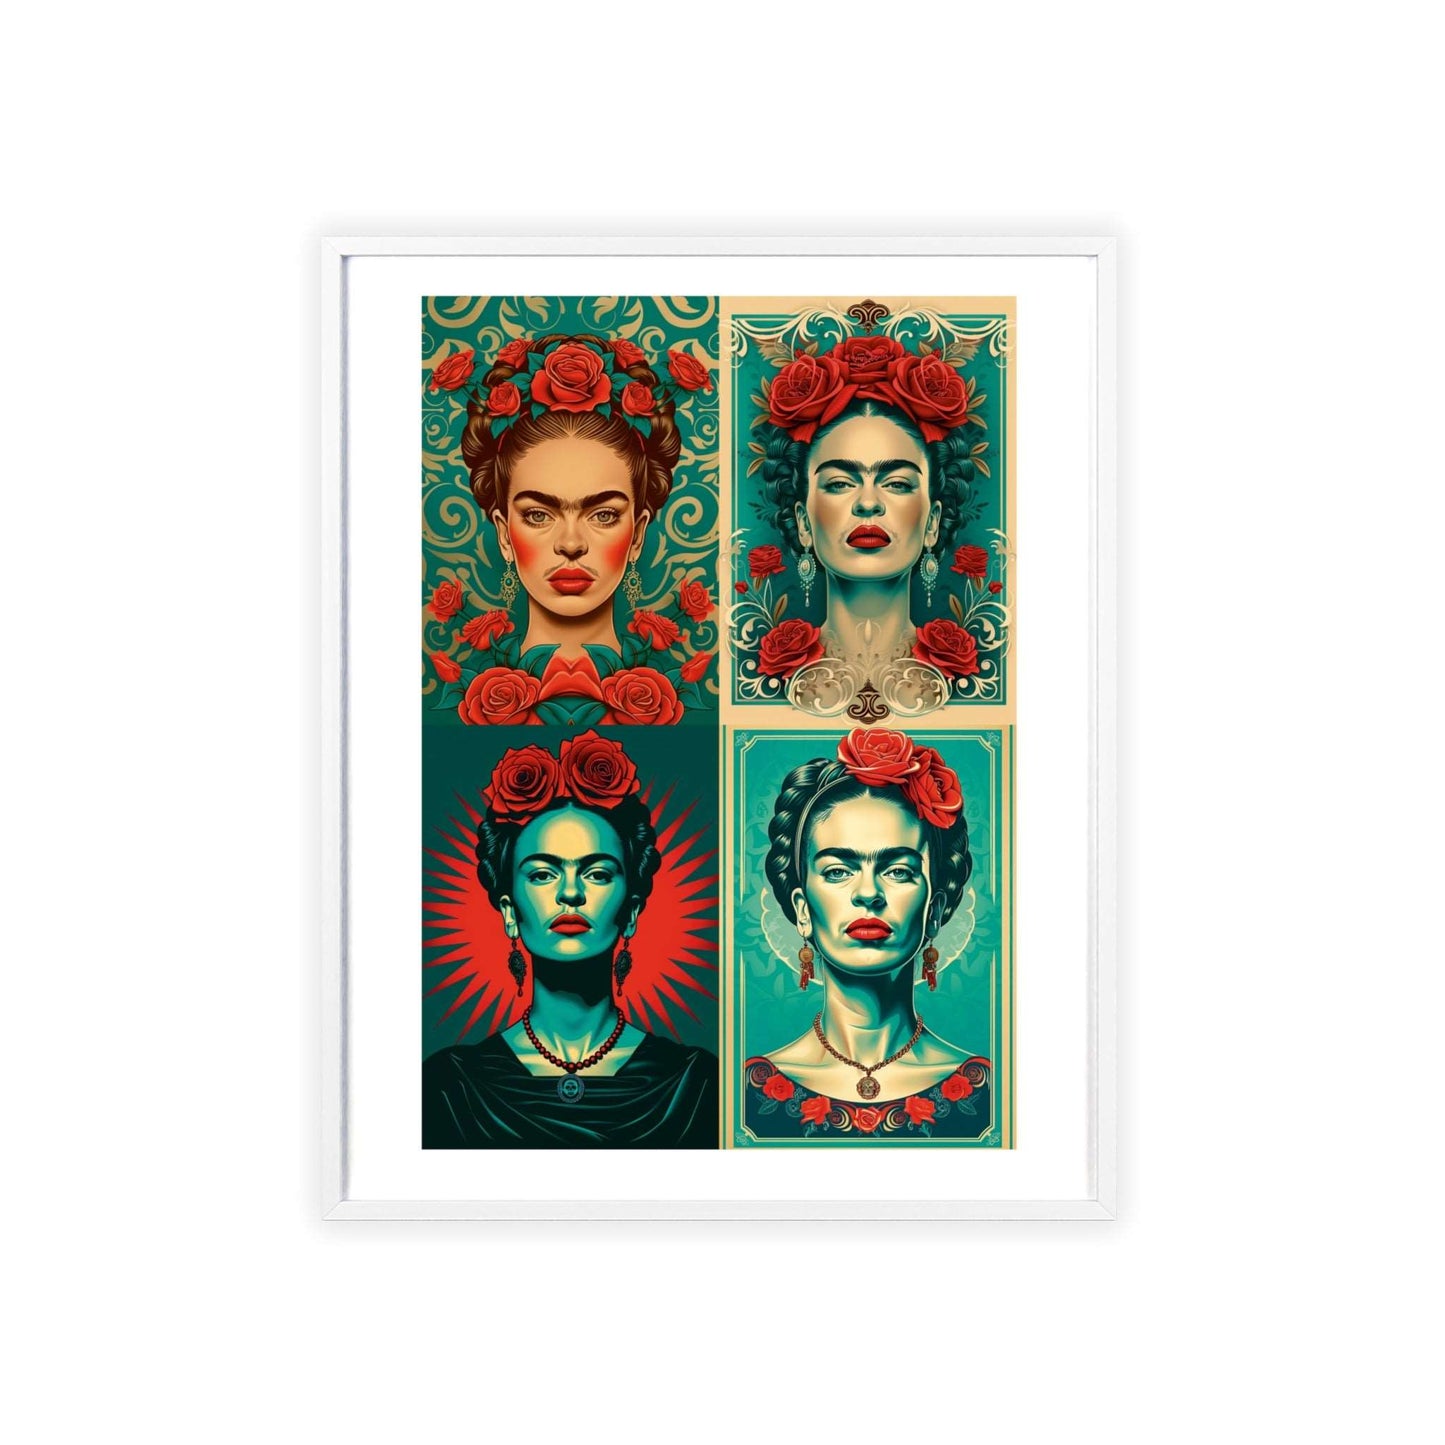 Framed poster featuring four separate Art Deco-inspired vector illustrations of Frida Kahlo. Each illustration uses a turquoise and red color palette and depicts Frida adorned with roses. The designs are detailed and flat, reminiscent of Dan Mumford's style.